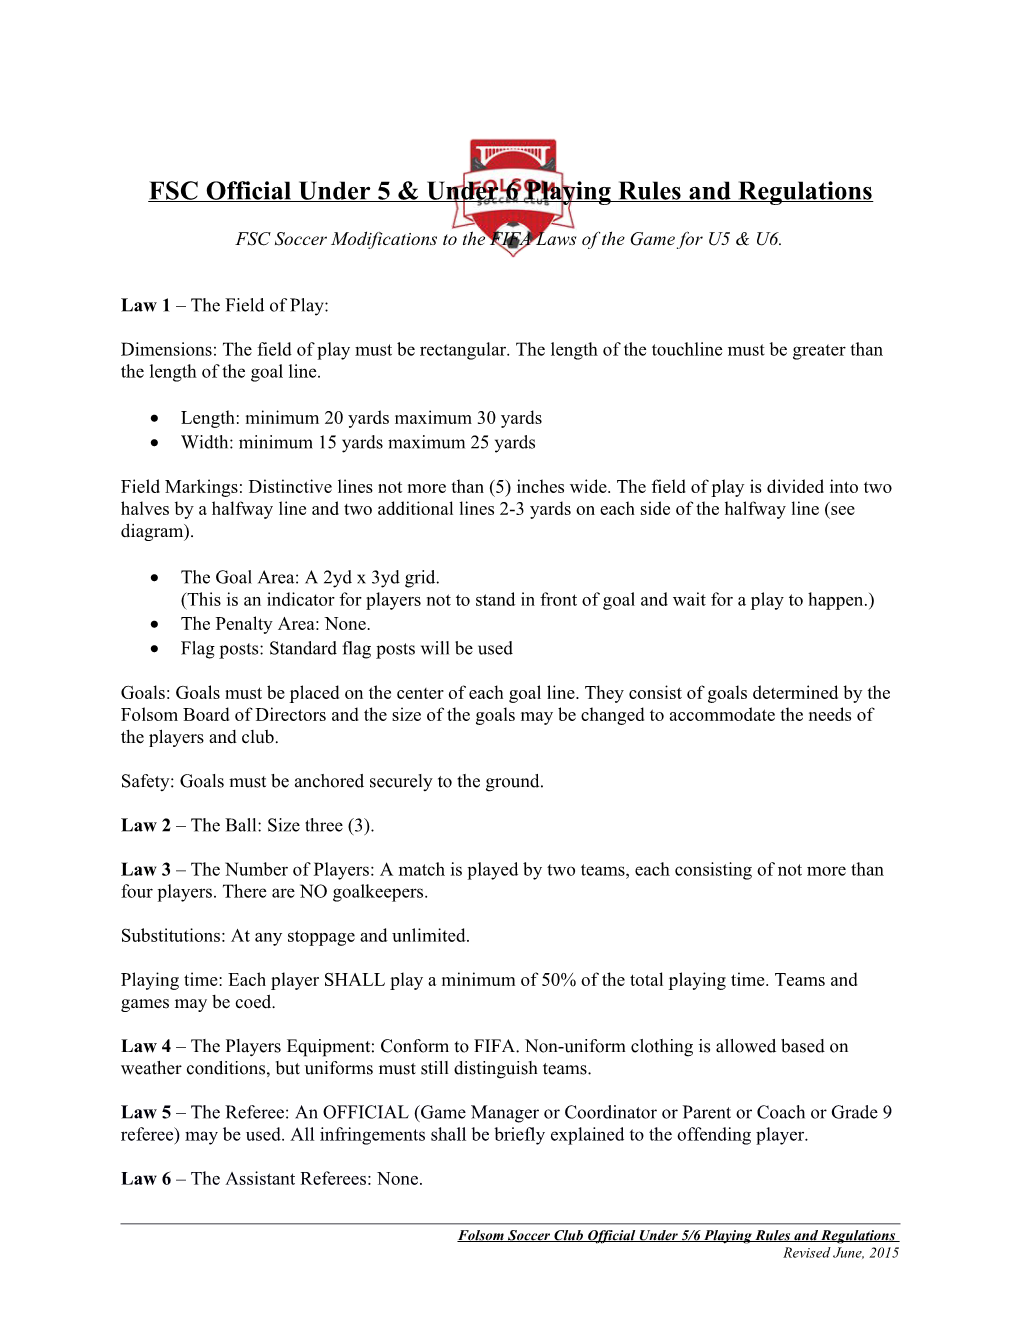 FSC Official Under 5 & Under 6 Playing Rules and Regulations